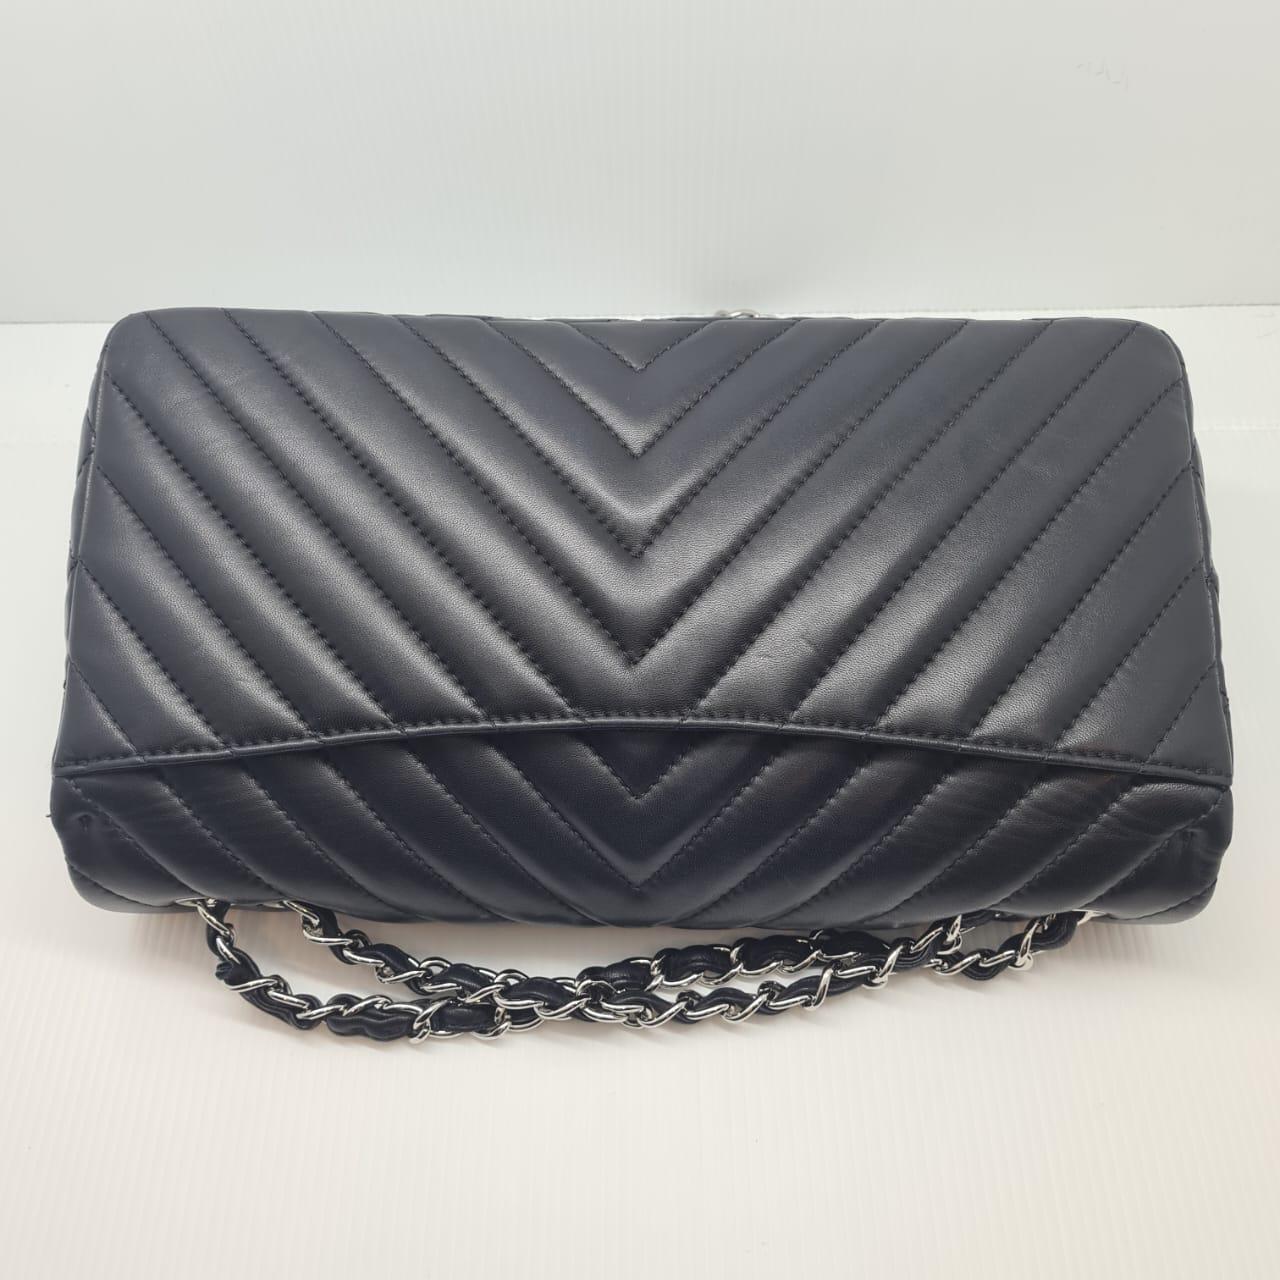 Chanel Large Black Lambskin Chevron Quilted Single Flap Bag For Sale 6